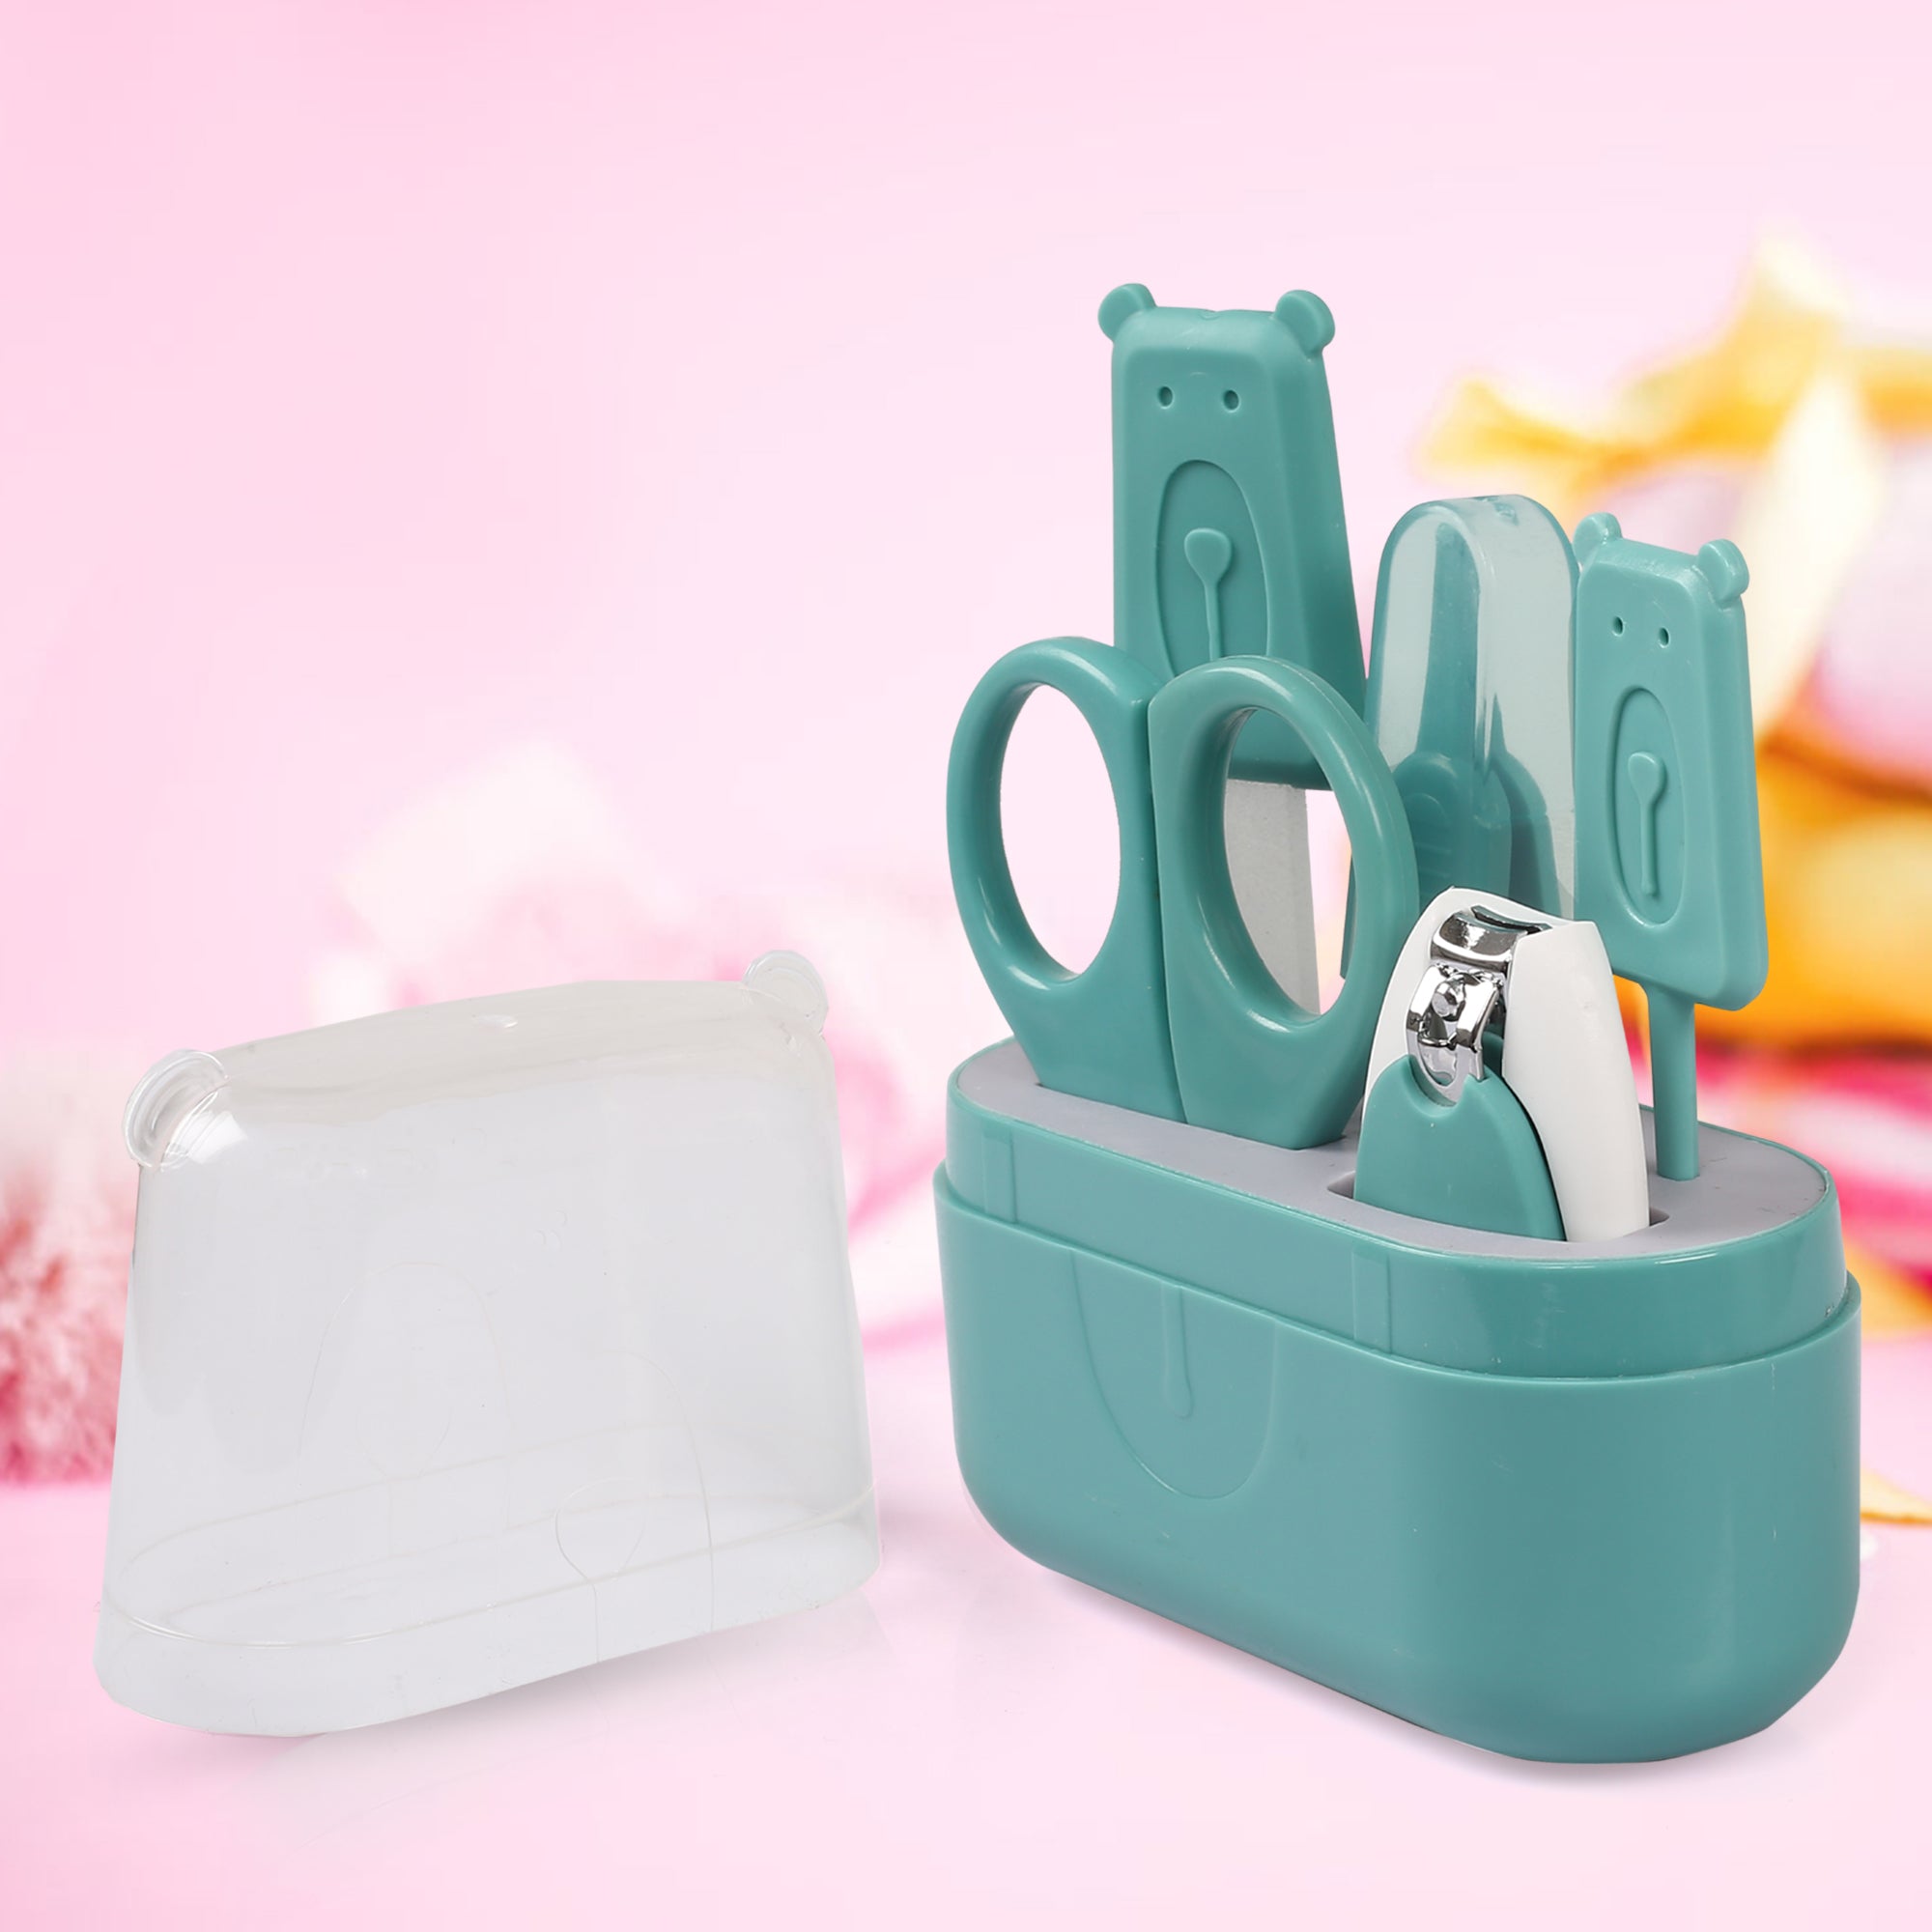 Teal Grooming Kit of 5 Pcs with a Nail Clipper